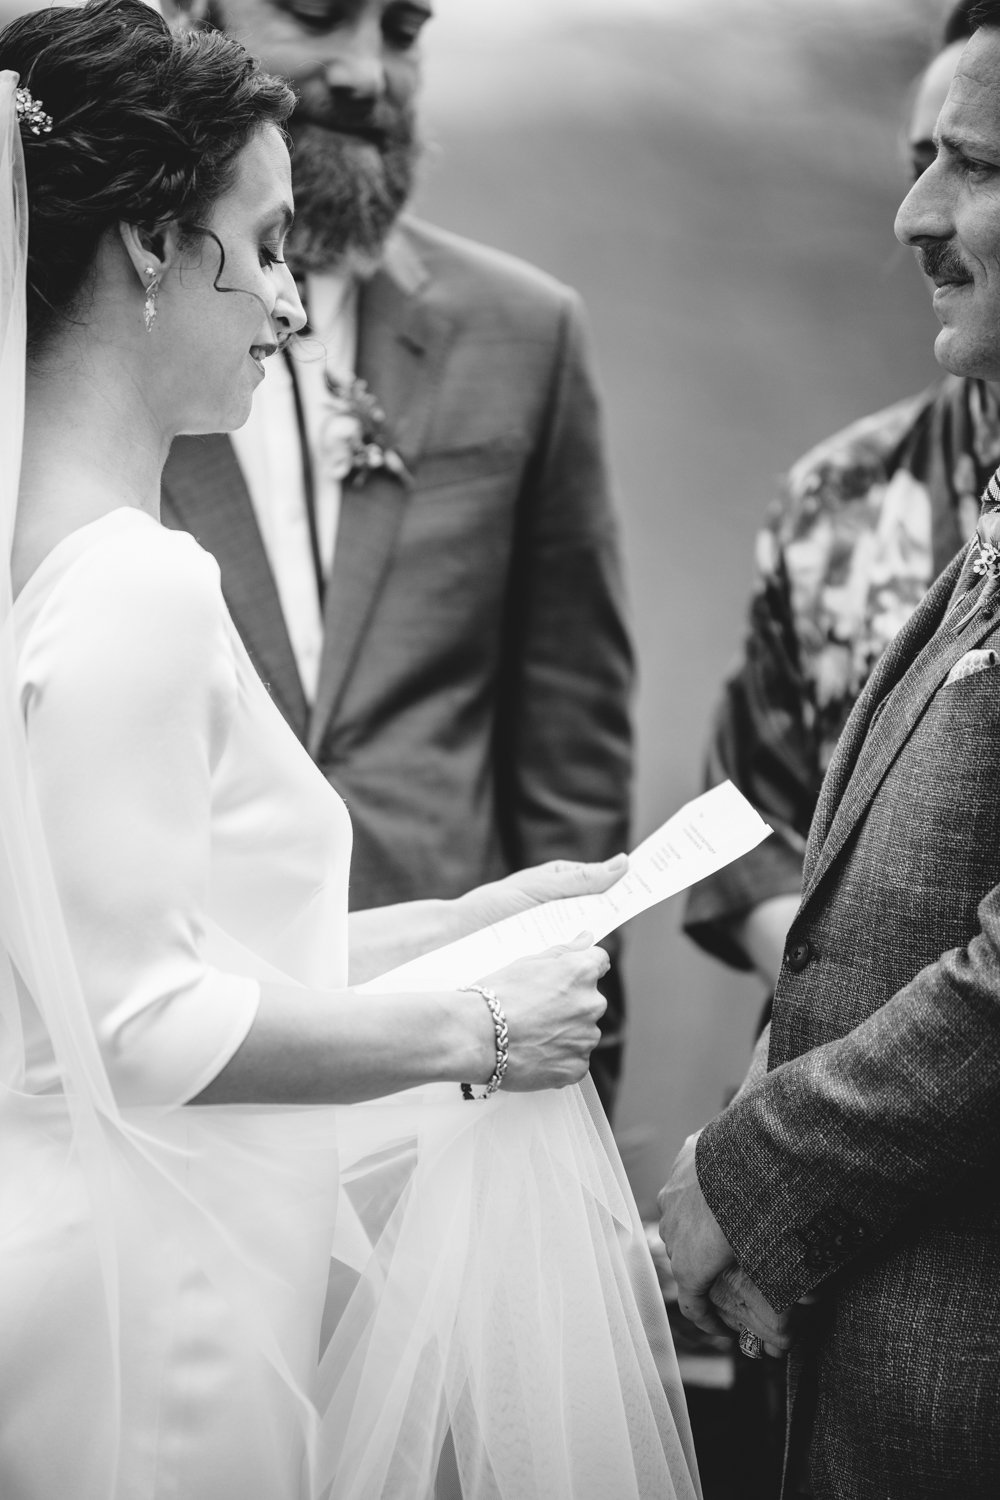 Bride reads from a paper as she stands facing the groom.

Upstate New York Wedding Photography. Cold Spring NY Wedding Photography. Luxury Local Wedding Photographer. Destination Wedding Photographer.